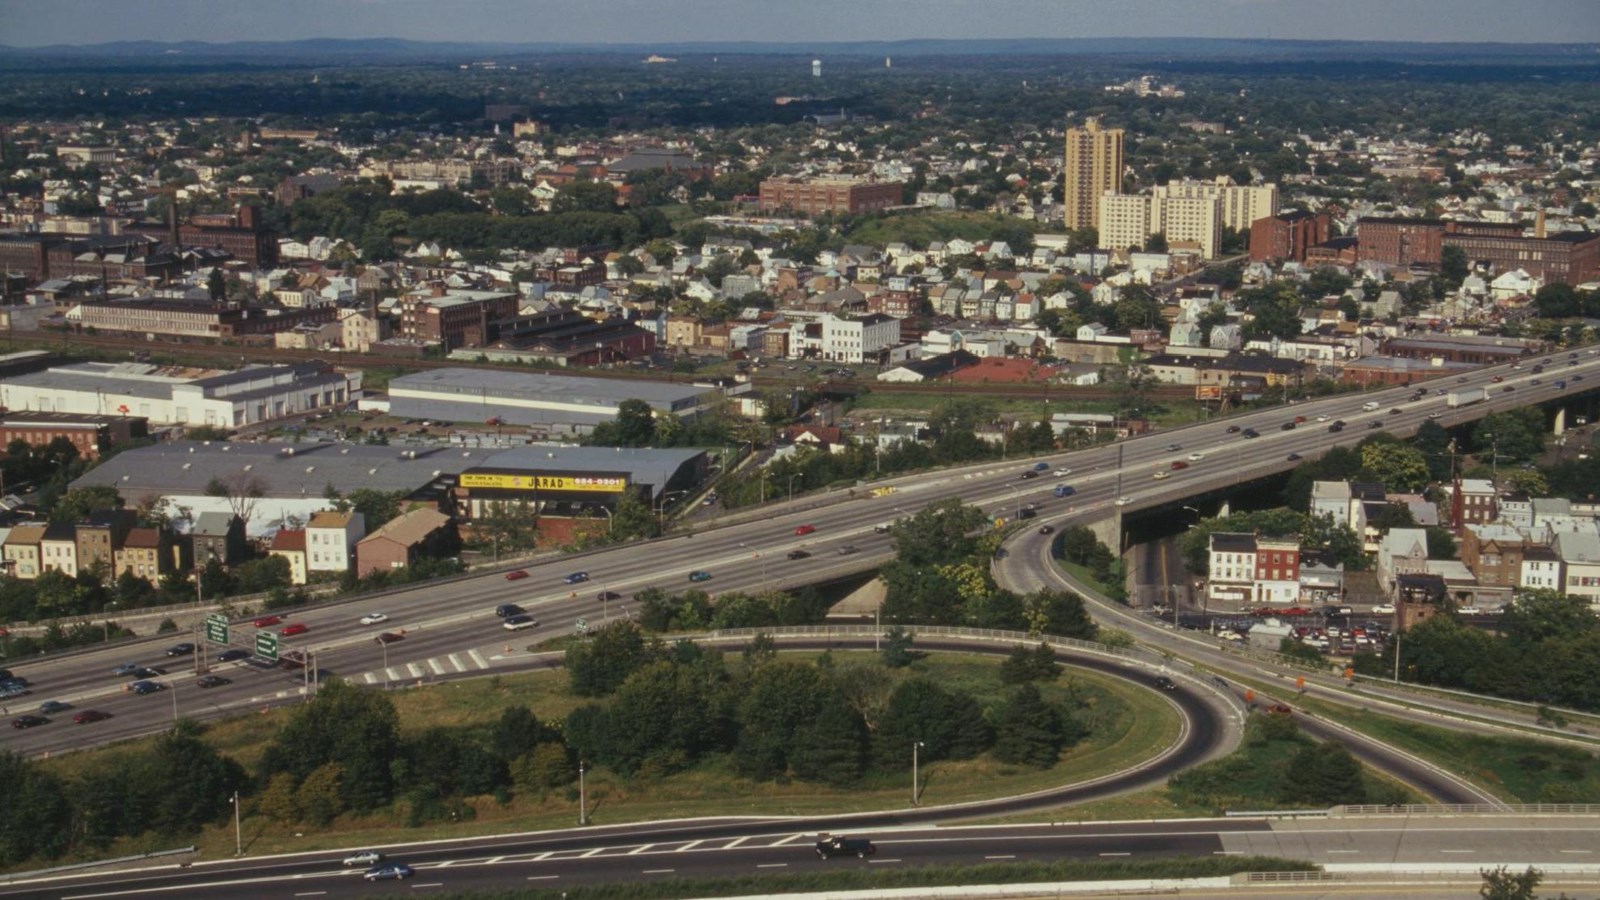 Industrial buildings extend to the horizon with a highway cutting across the foreground.